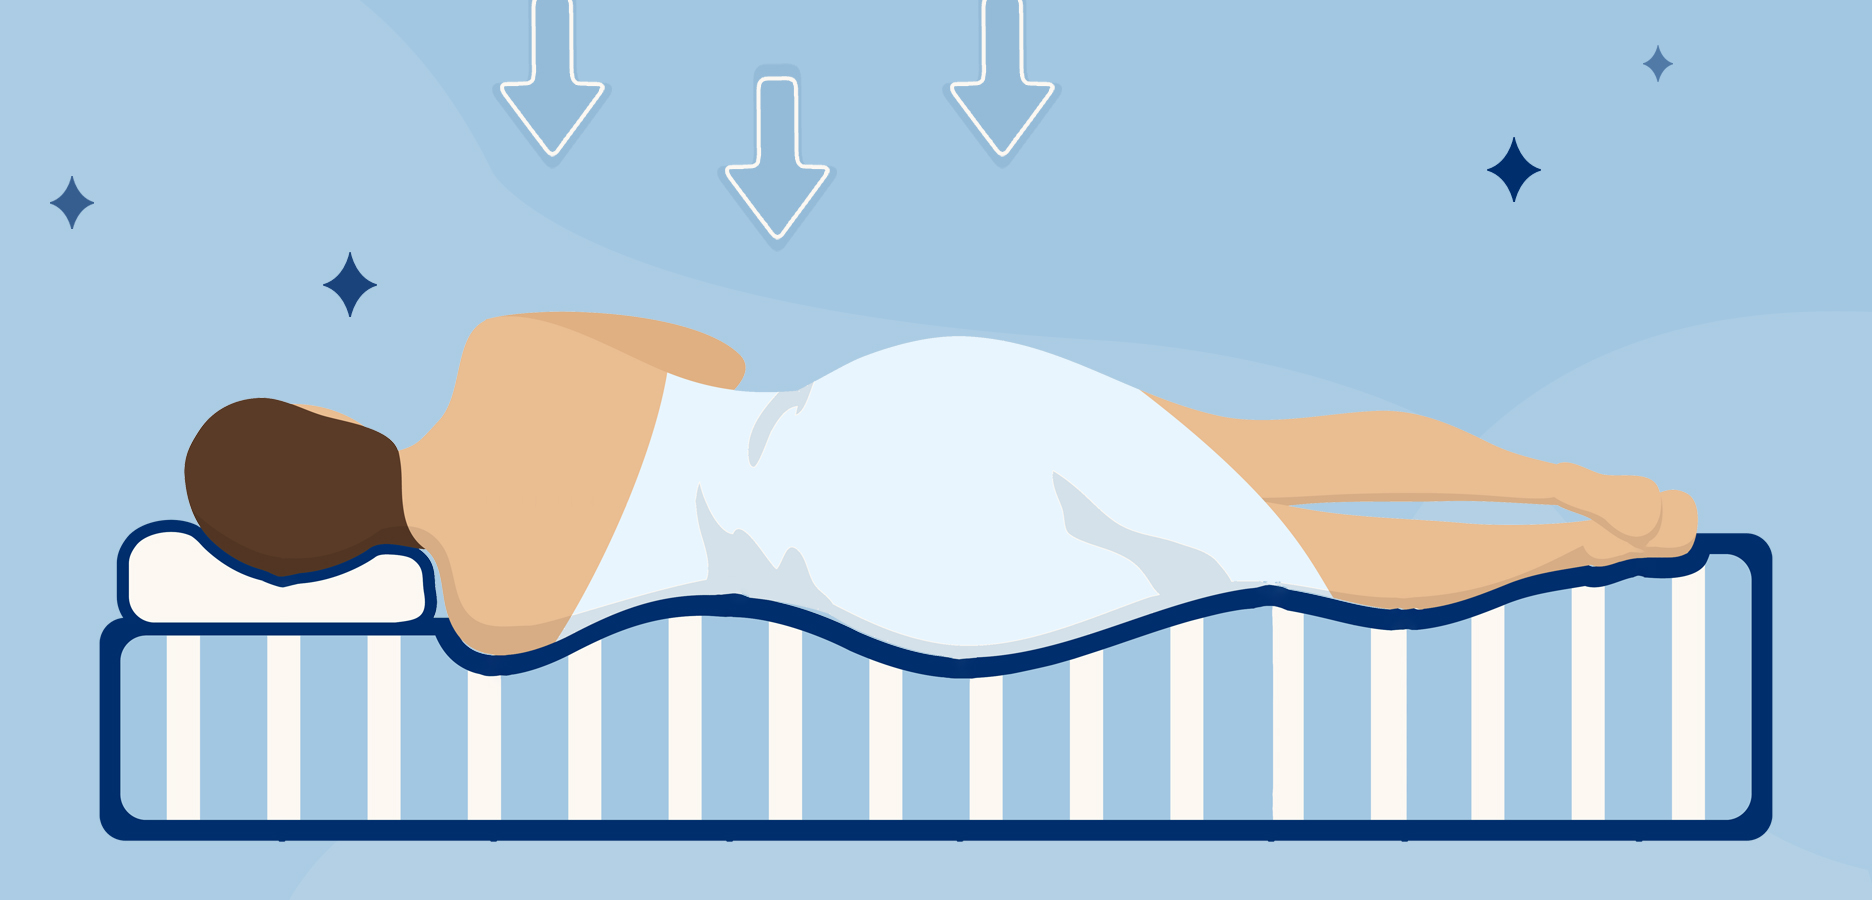 What to Do About a Sagging Mattress - MLILY